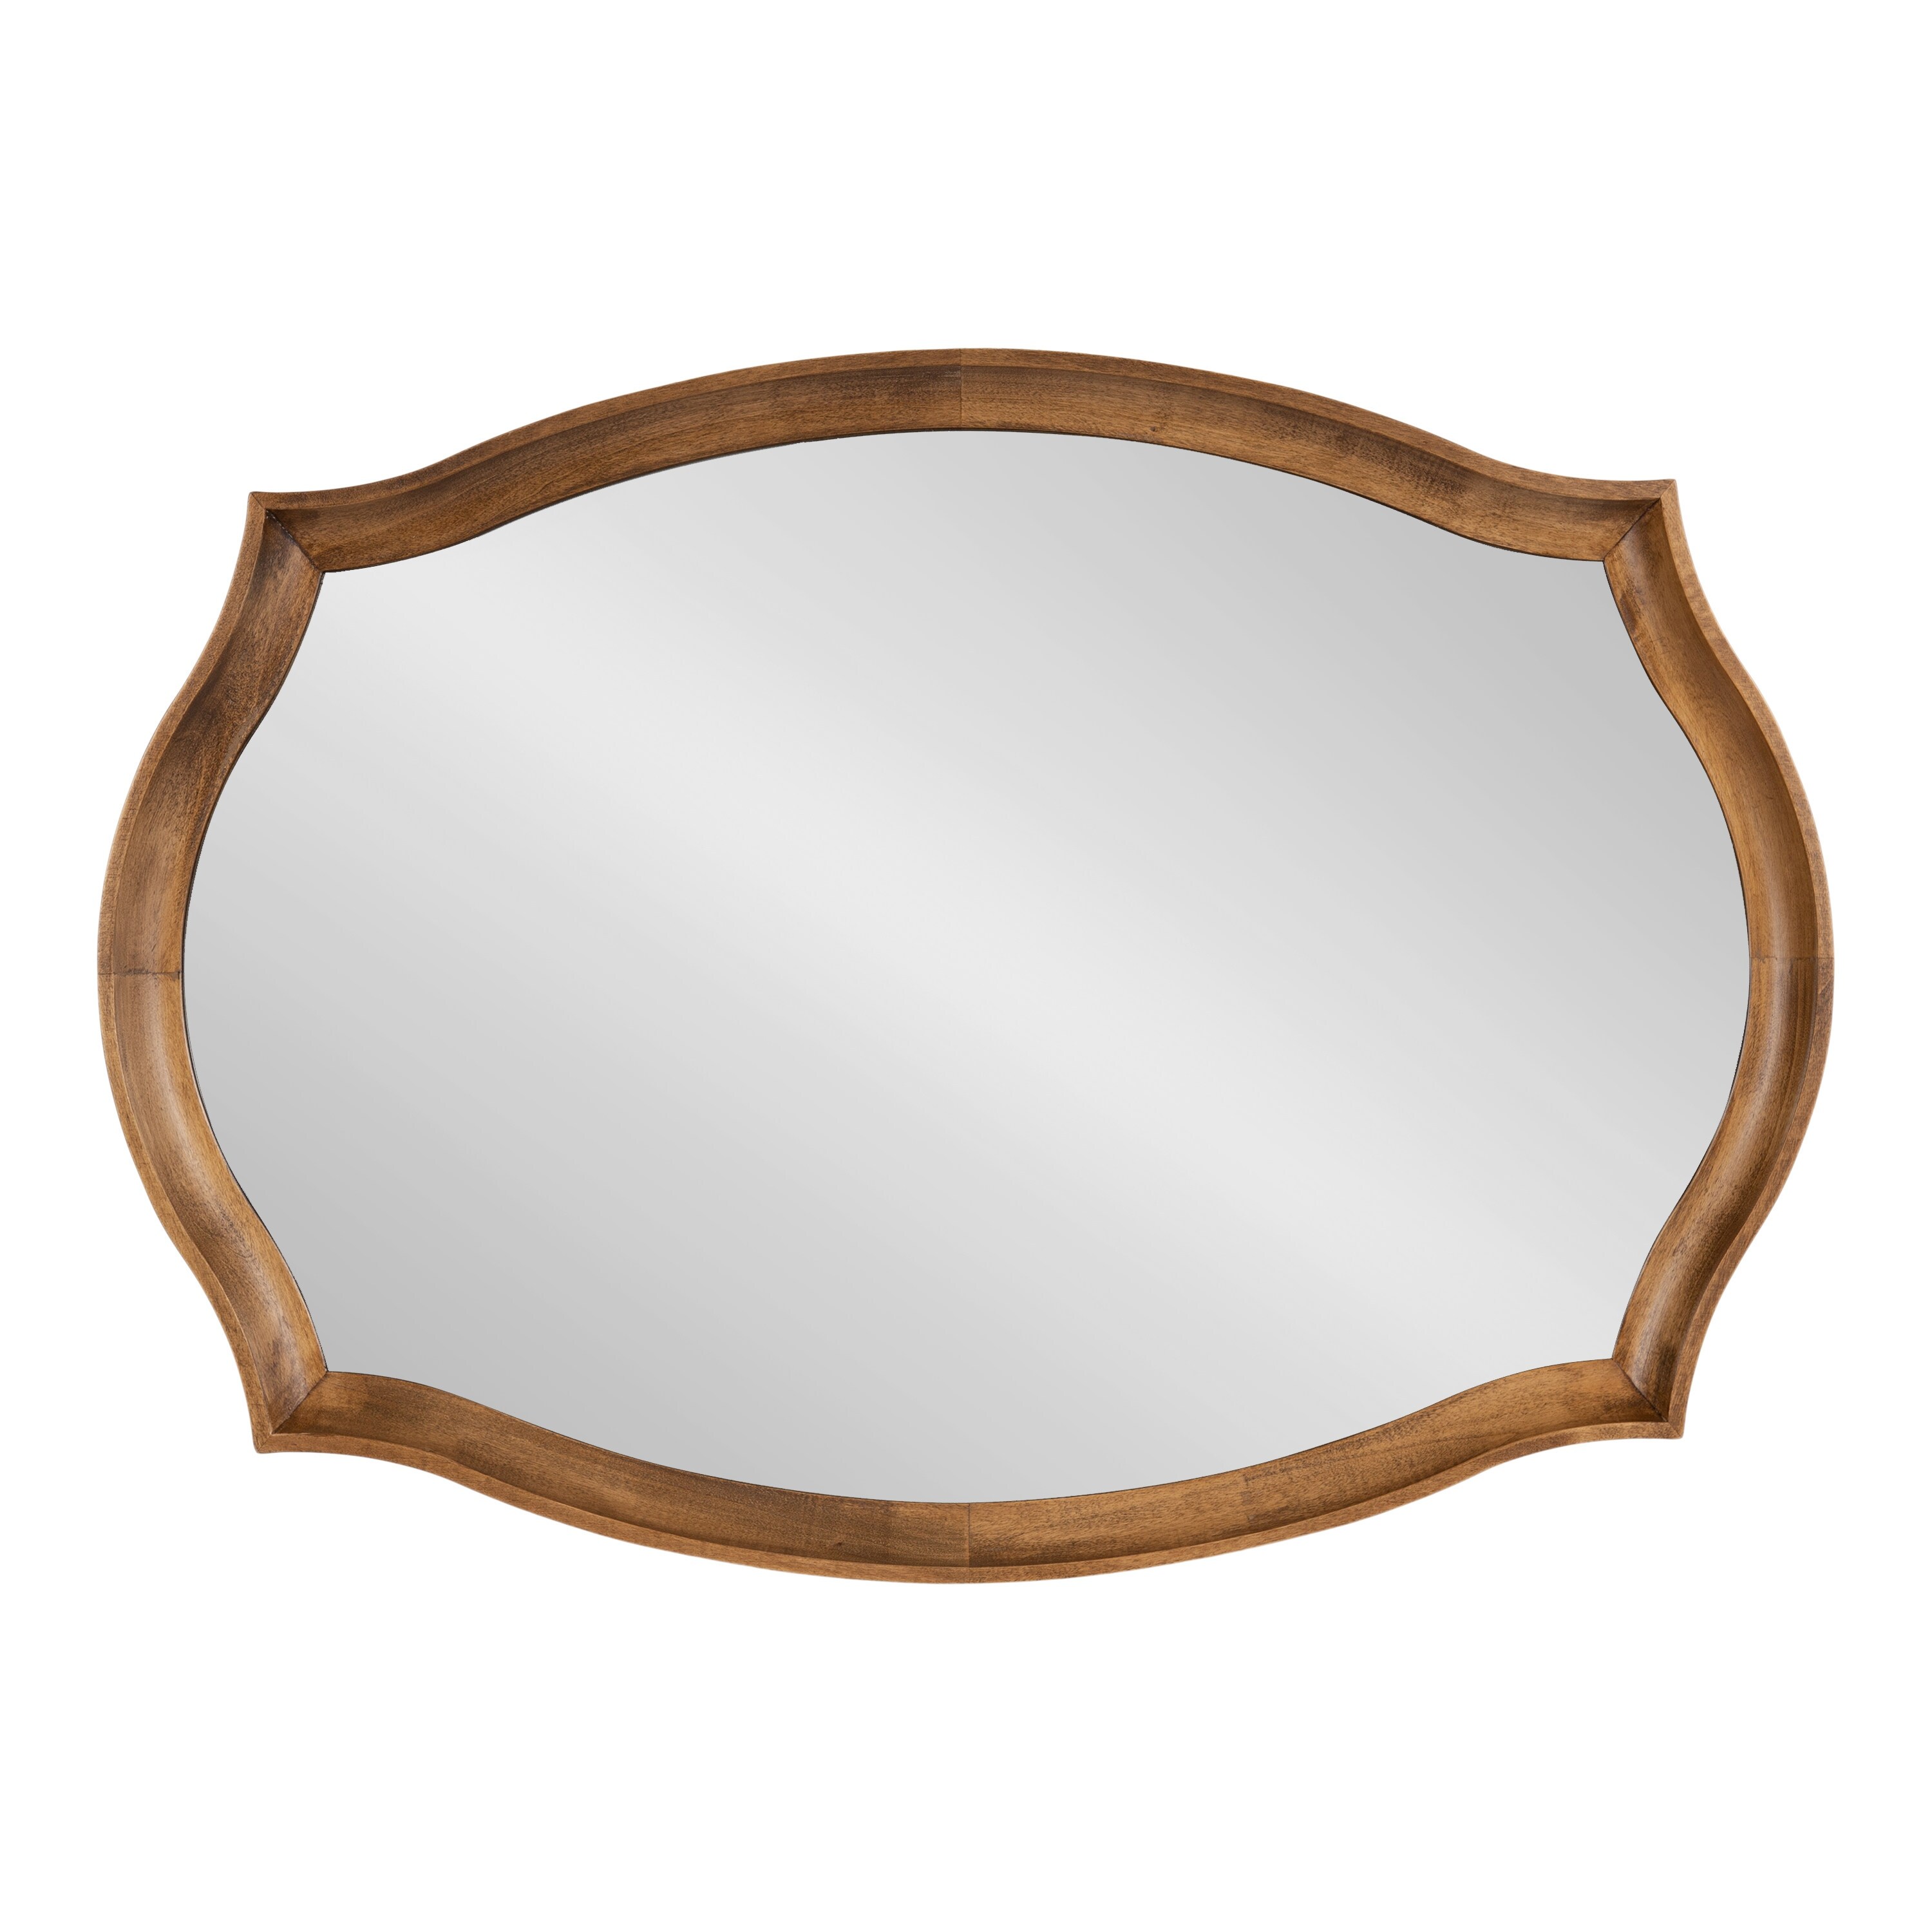 Kate and Laurel Hatherleigh Scallop Wall Mirror